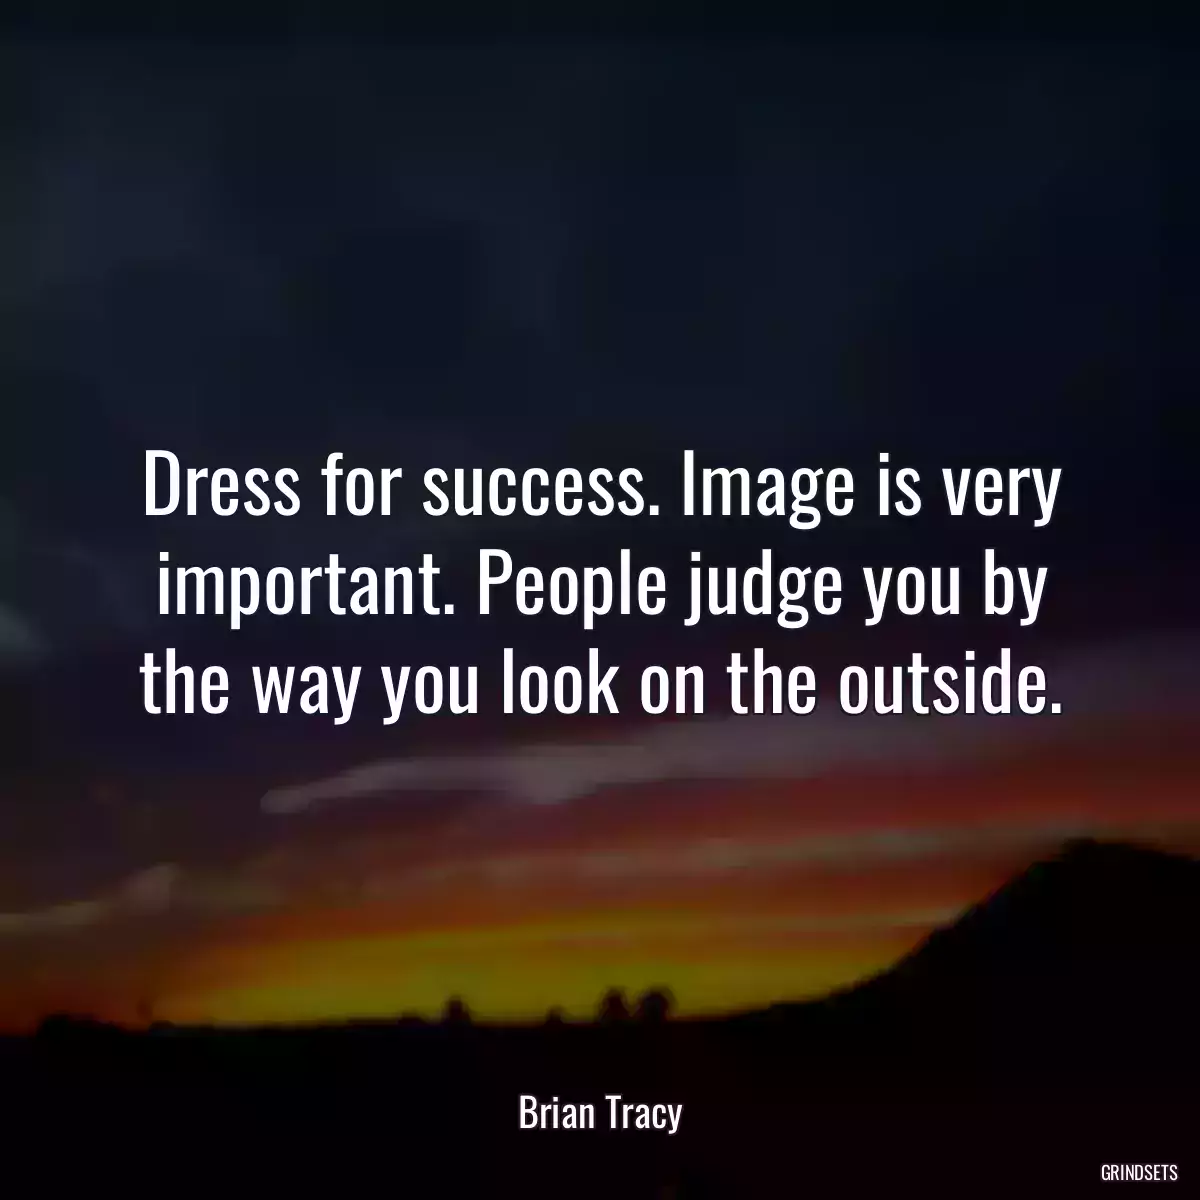 Dress for success. Image is very important. People judge you by the way you look on the outside.